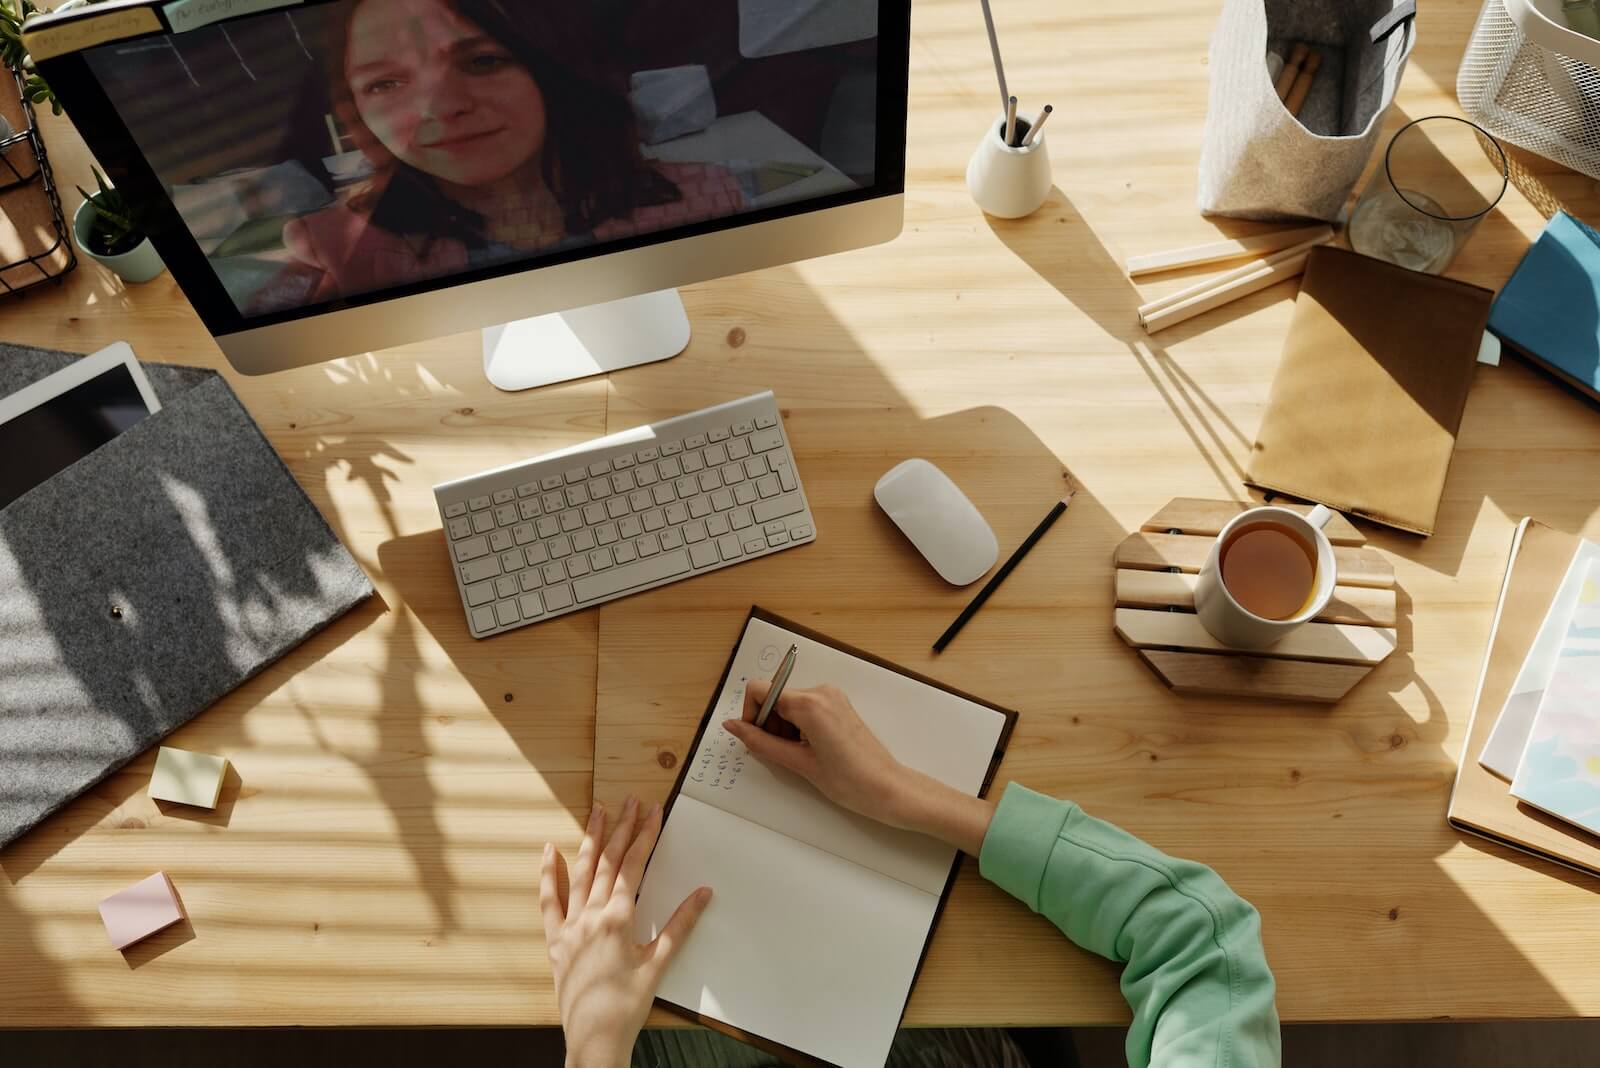 How to make virtual meetings more productive through office design